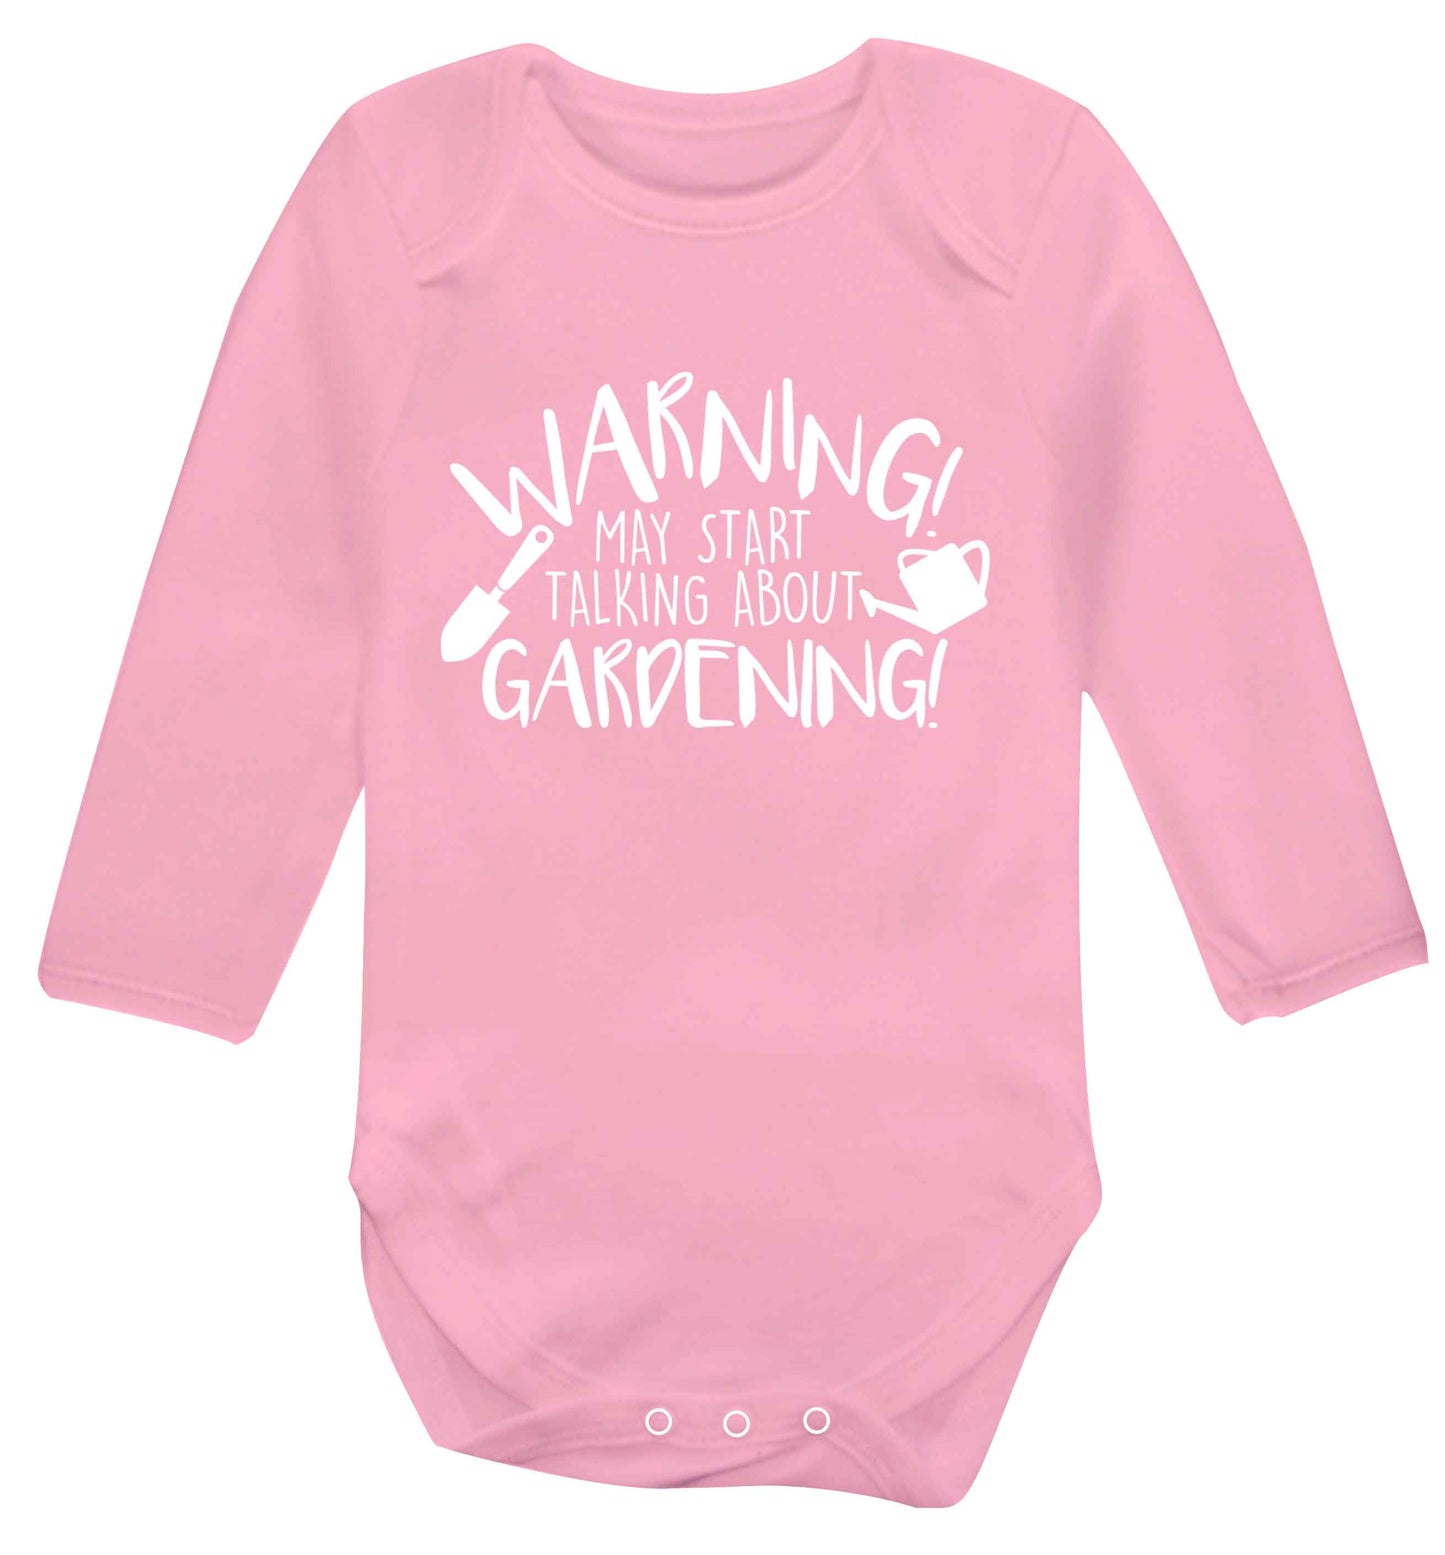 Warning may start talking about gardening Baby Vest long sleeved pale pink 6-12 months